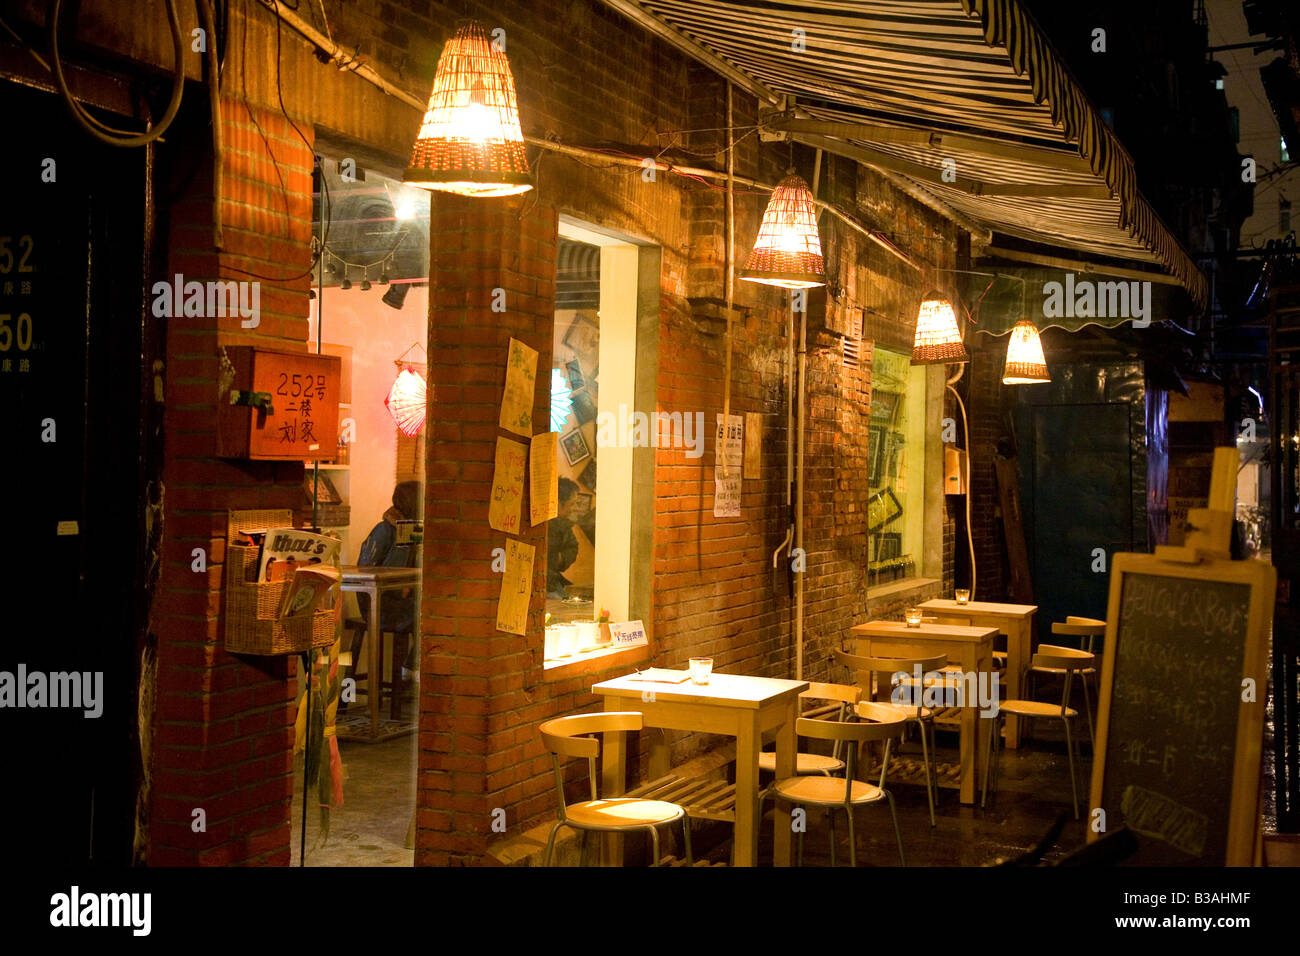 Cafe in Taiking Road distirct of Shanghai Stock Photo